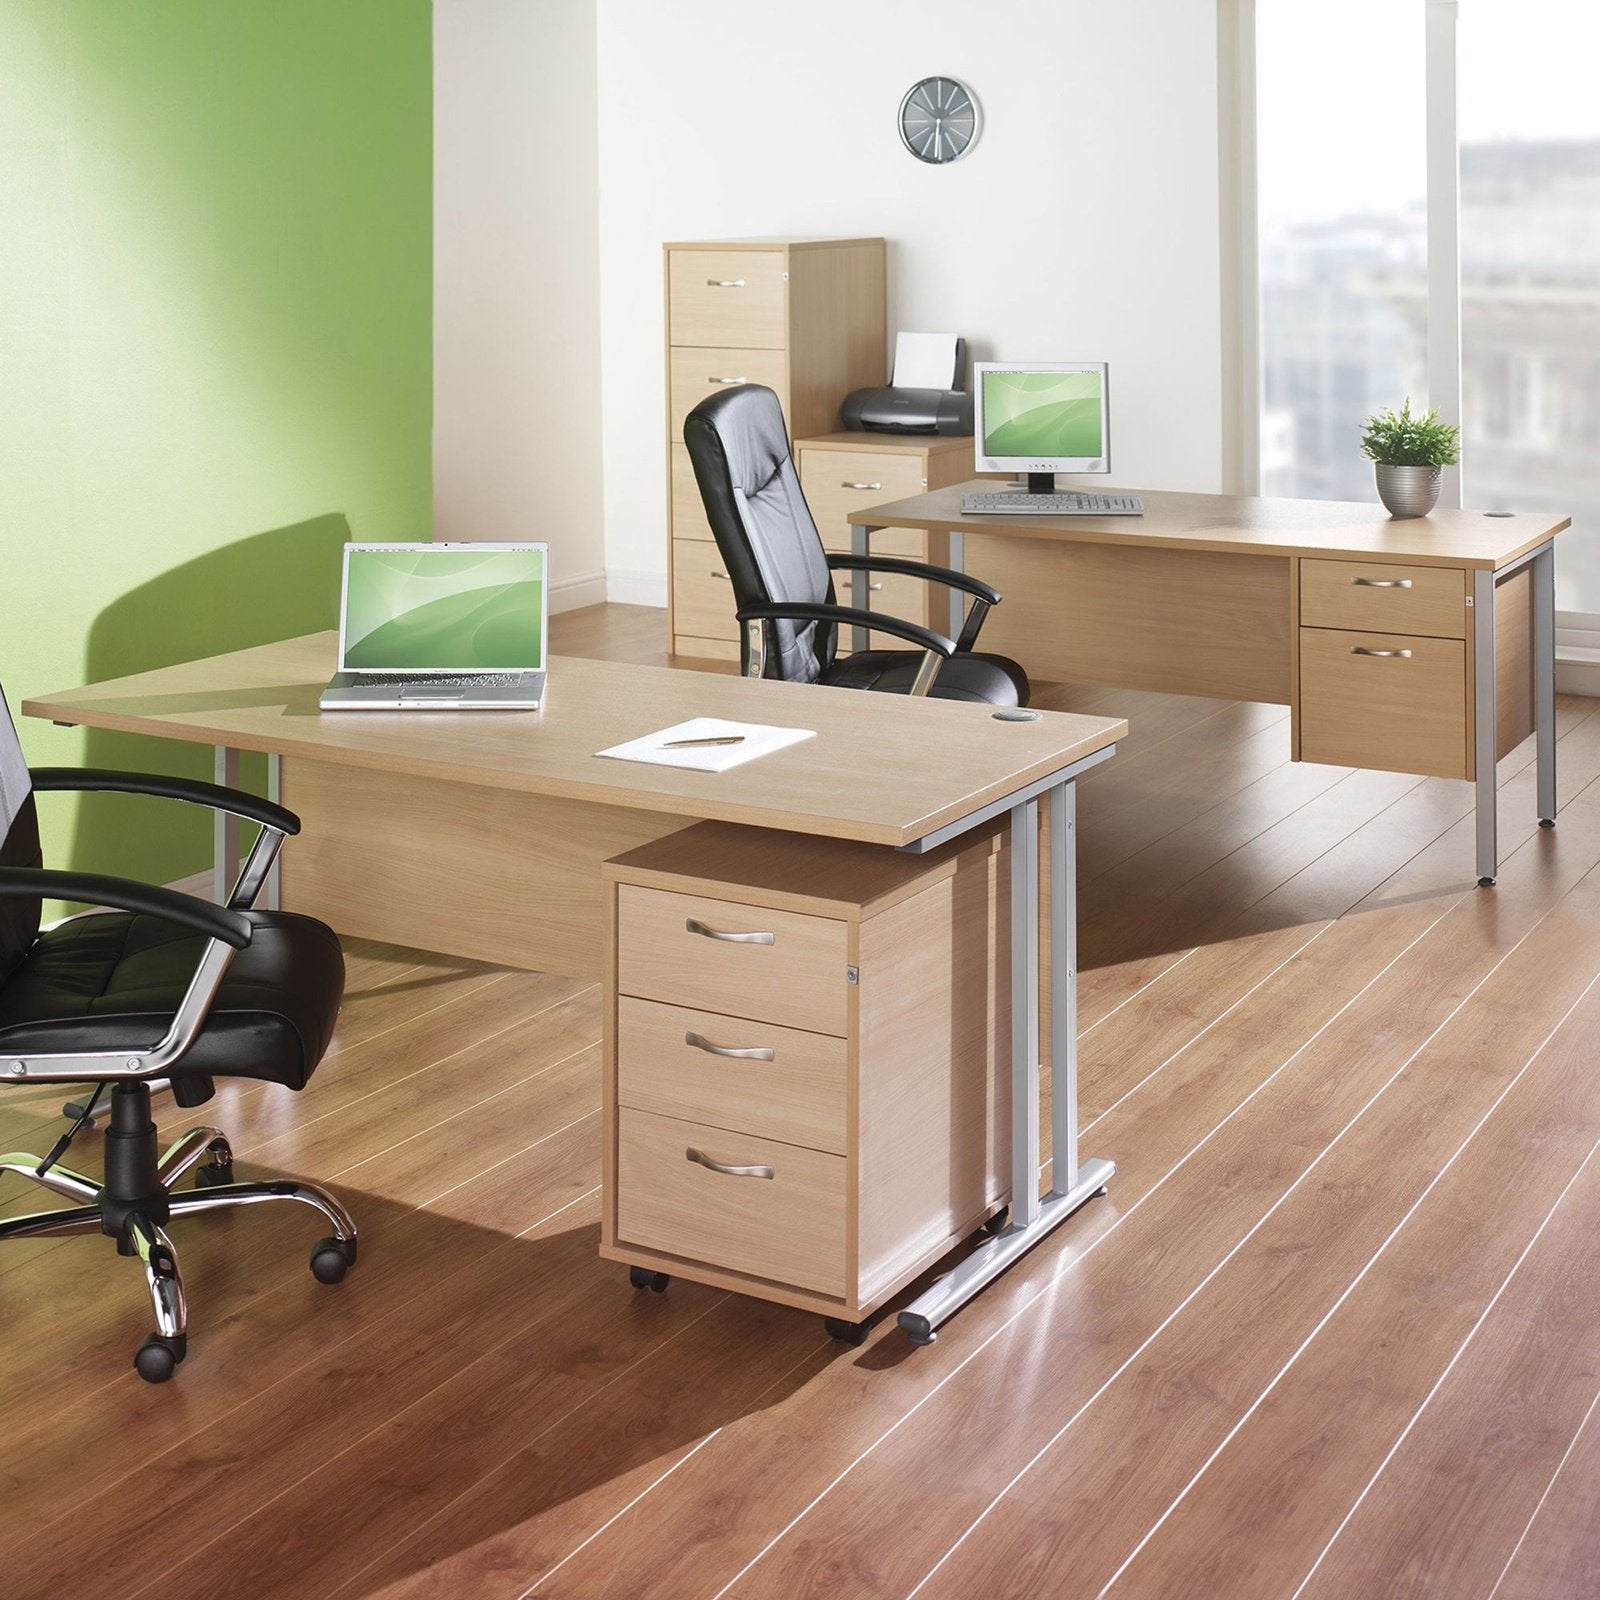 Maestro 25 cantilever leg straight desk 800 deep - Office Products Online